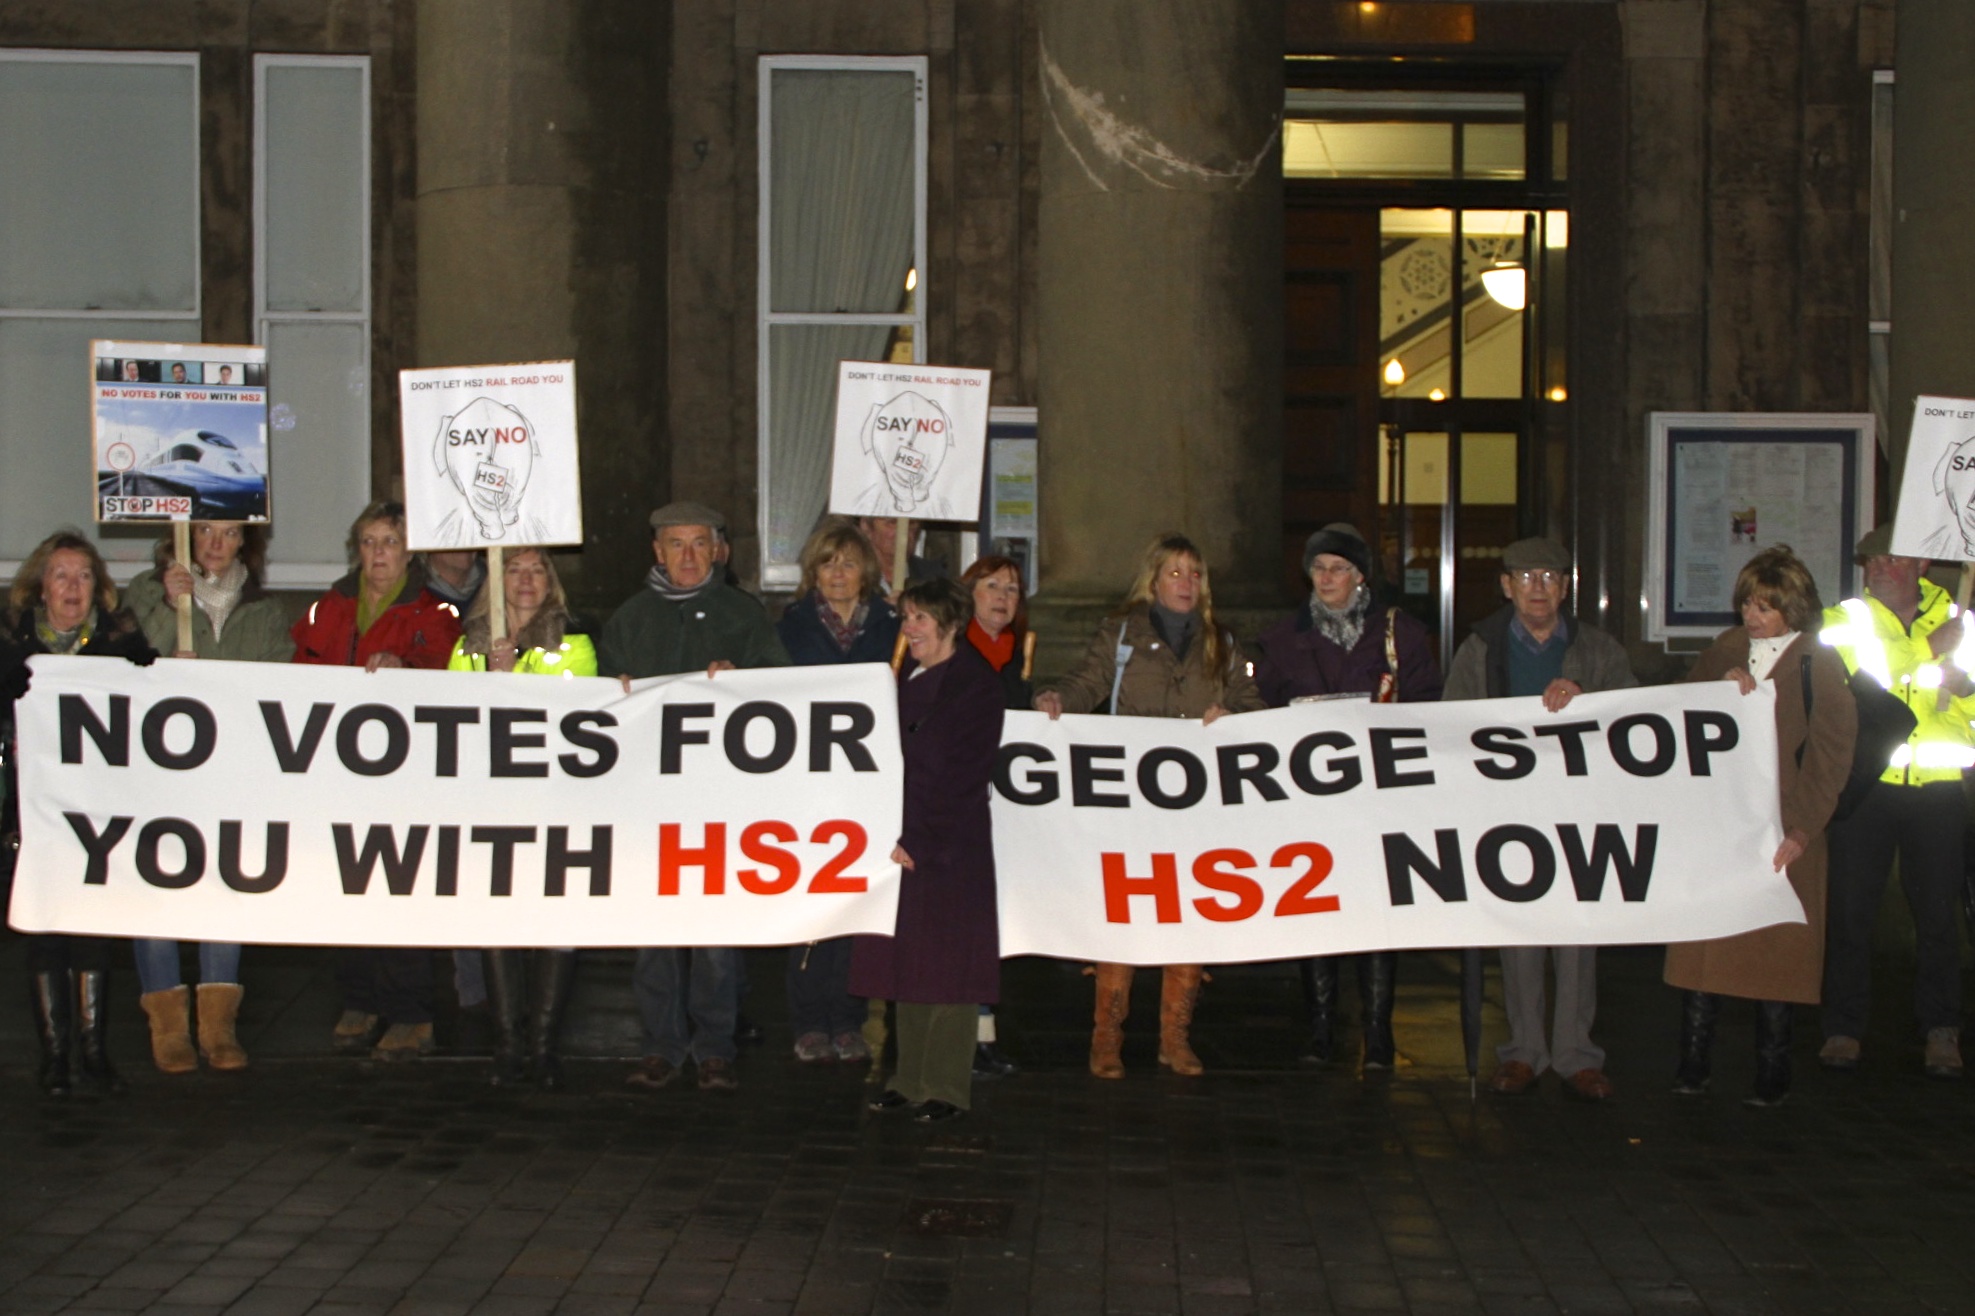 Protest outside George Osborne's meeting with Parish Councillors: signs read "no votes for you with HS2" and "George Stop HS2 now"